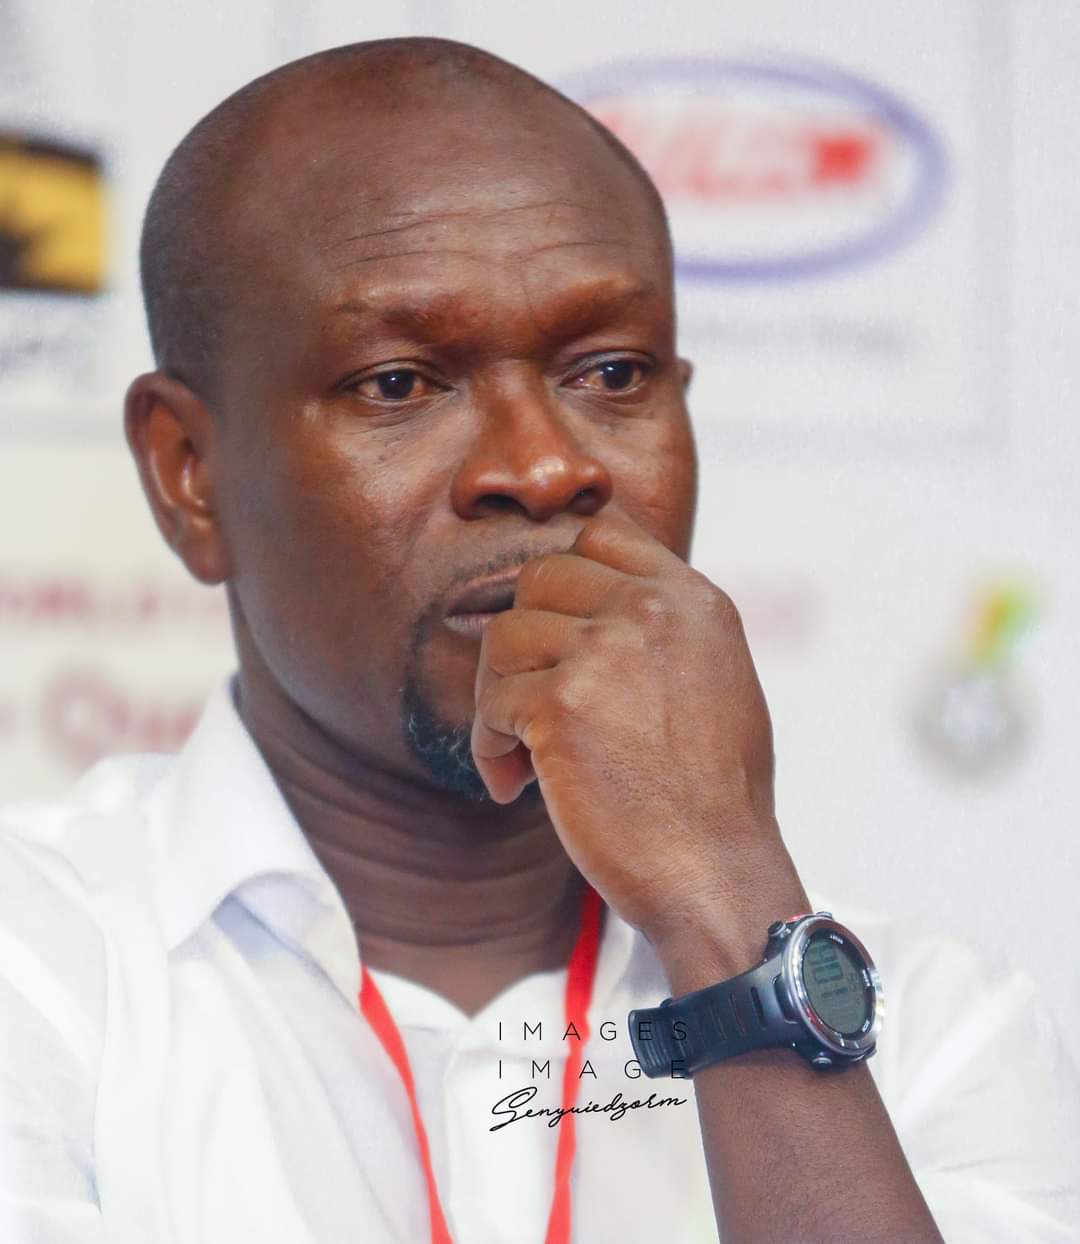 2022 World Cup qualifiers: Blame CK Akonnor's assistants for not helping him against South Africa- Agyemang Badu